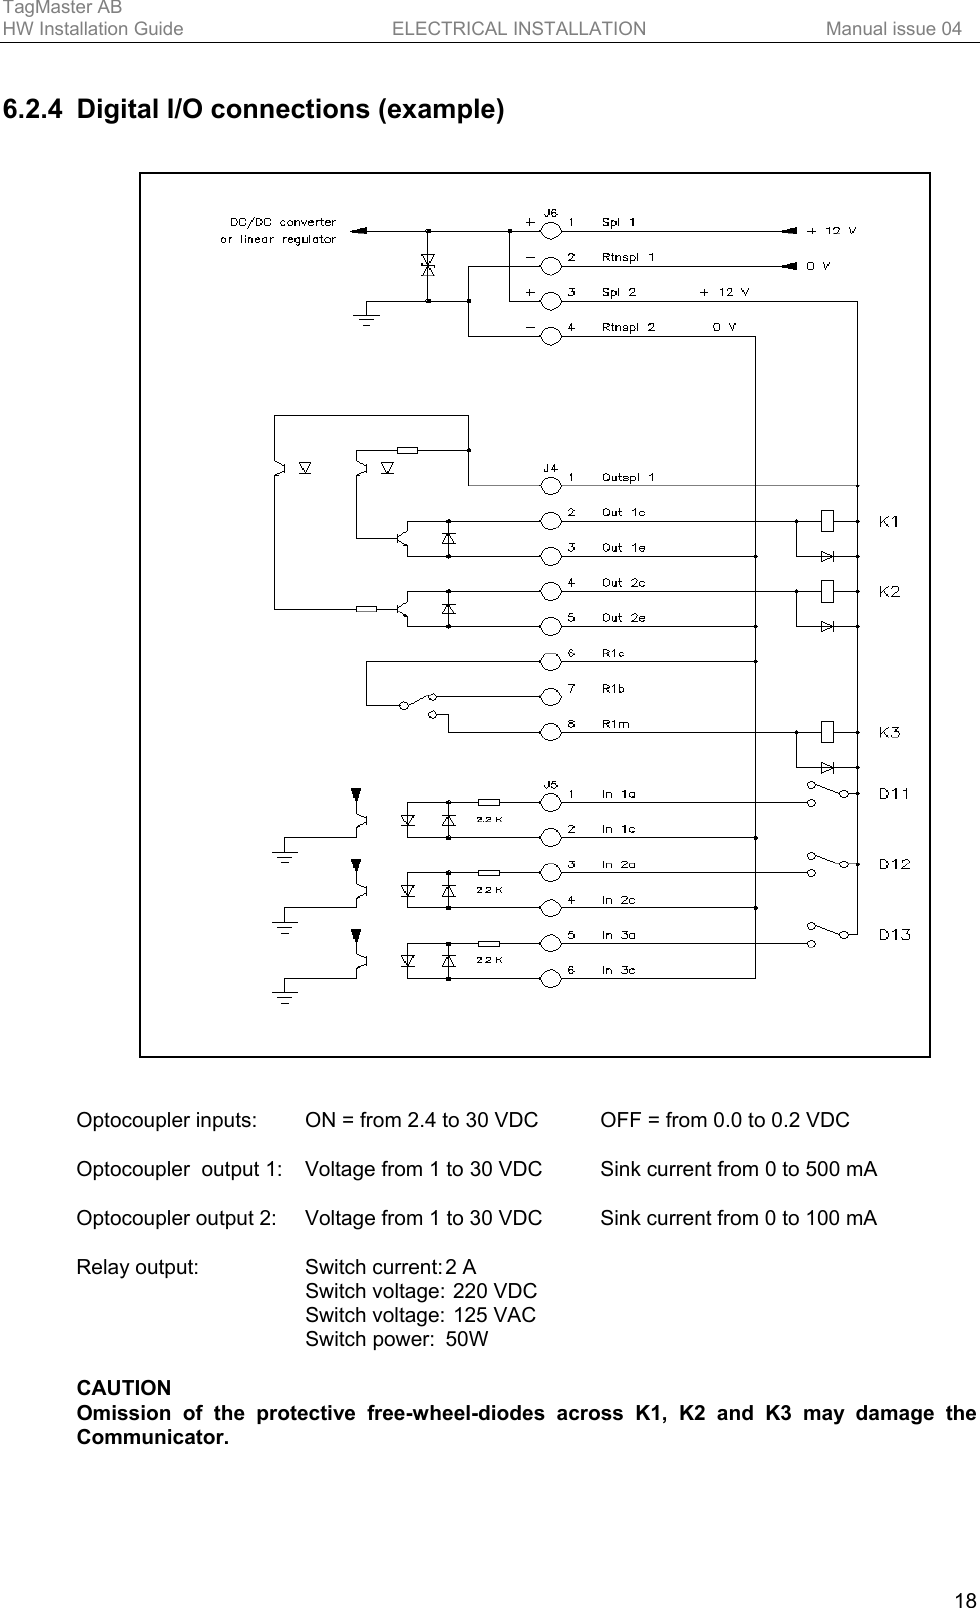 TagMaster AB     HW Installation Guide  ELECTRICAL INSTALLATION  Manual issue 04  18 6.2.4  Digital I/O connections (example)   CAUTION Omission of the protective free-wheel-diodes across K1, K2 and K3 may damage the Communicator.  Optocoupler inputs:  ON = from 2.4 to 30 VDC   OFF = from 0.0 to 0.2 VDC  Optocoupler  output 1:  Voltage from 1 to 30 VDC  Sink current from 0 to 500 mA Optocoupler output 2:  Voltage from 1 to 30 VDC  Sink current from 0 to 100 mA Relay output:  Switch current: 2 A Switch voltage: 220 VDC Switch voltage: 125 VAC Switch power:  50W  